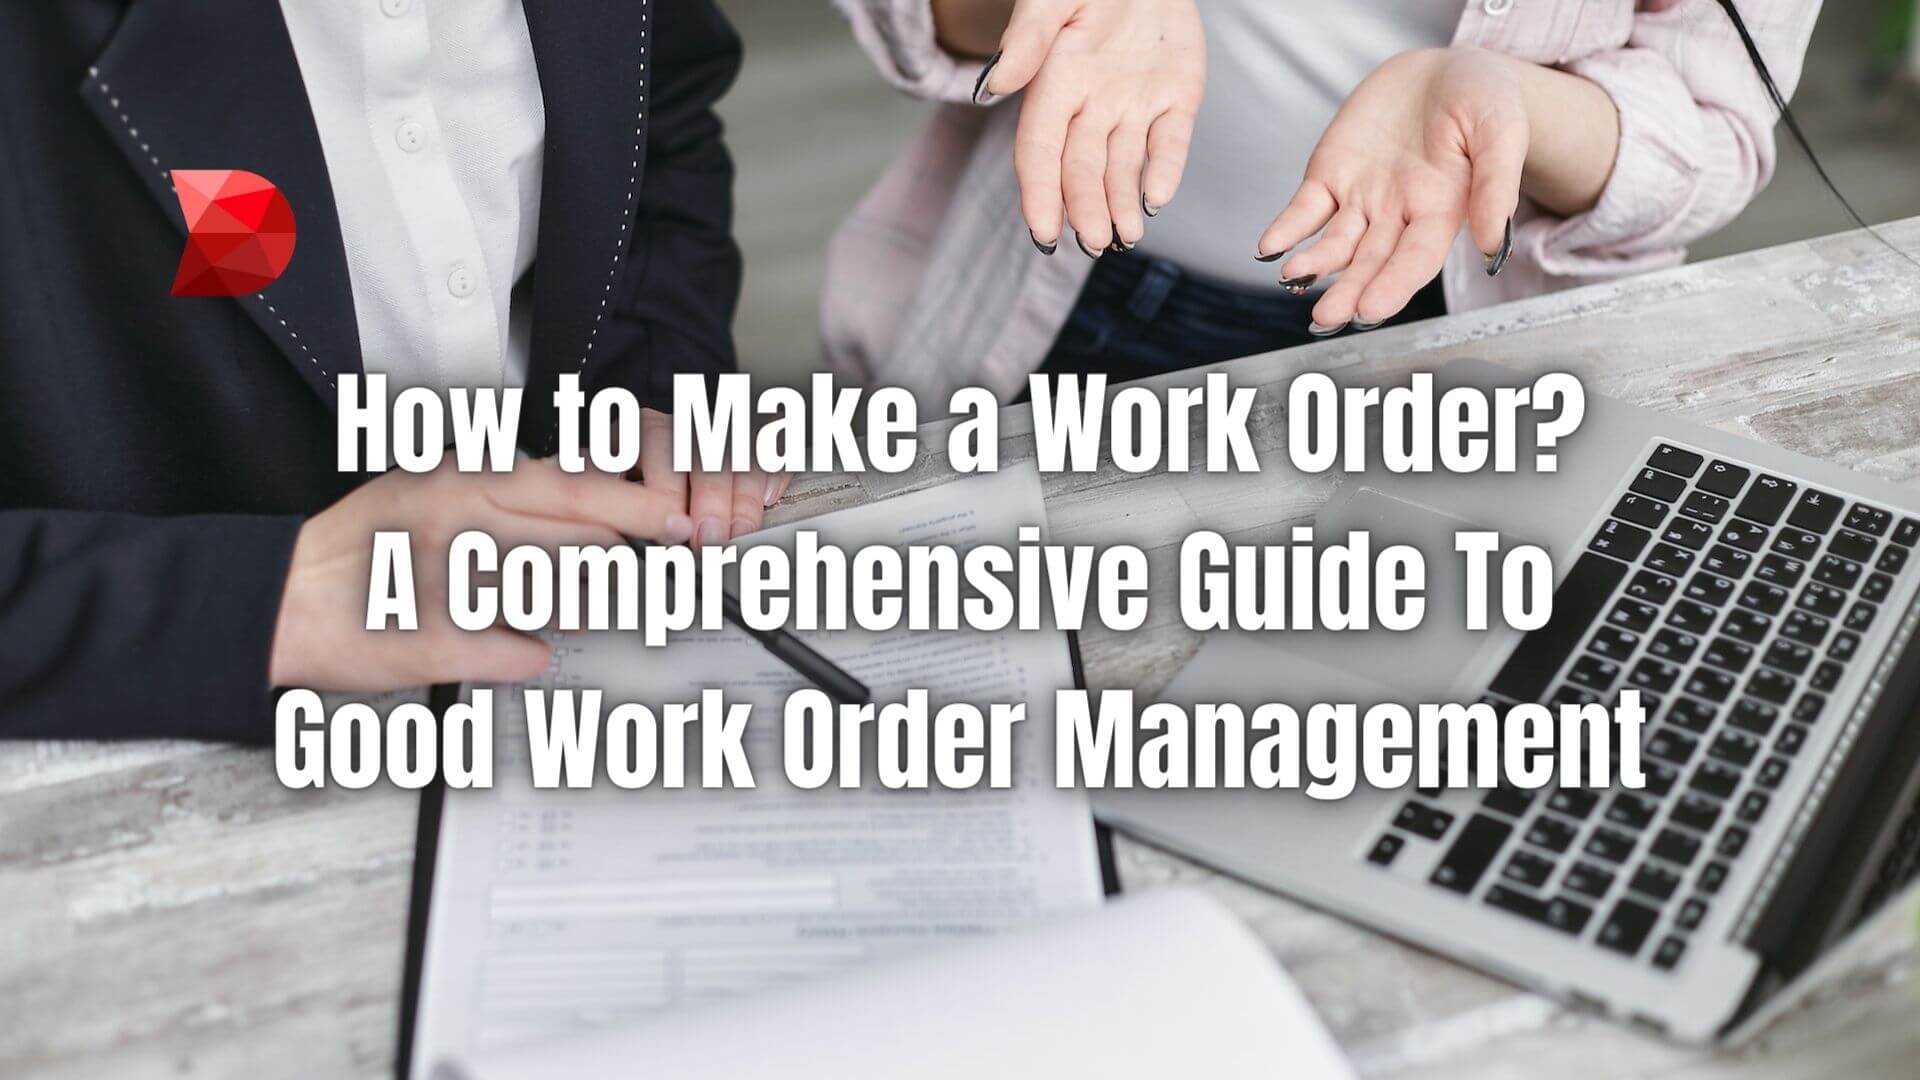 Are you running a business that's employing service professionals regularly? If so, read here to learn how to make a work order.